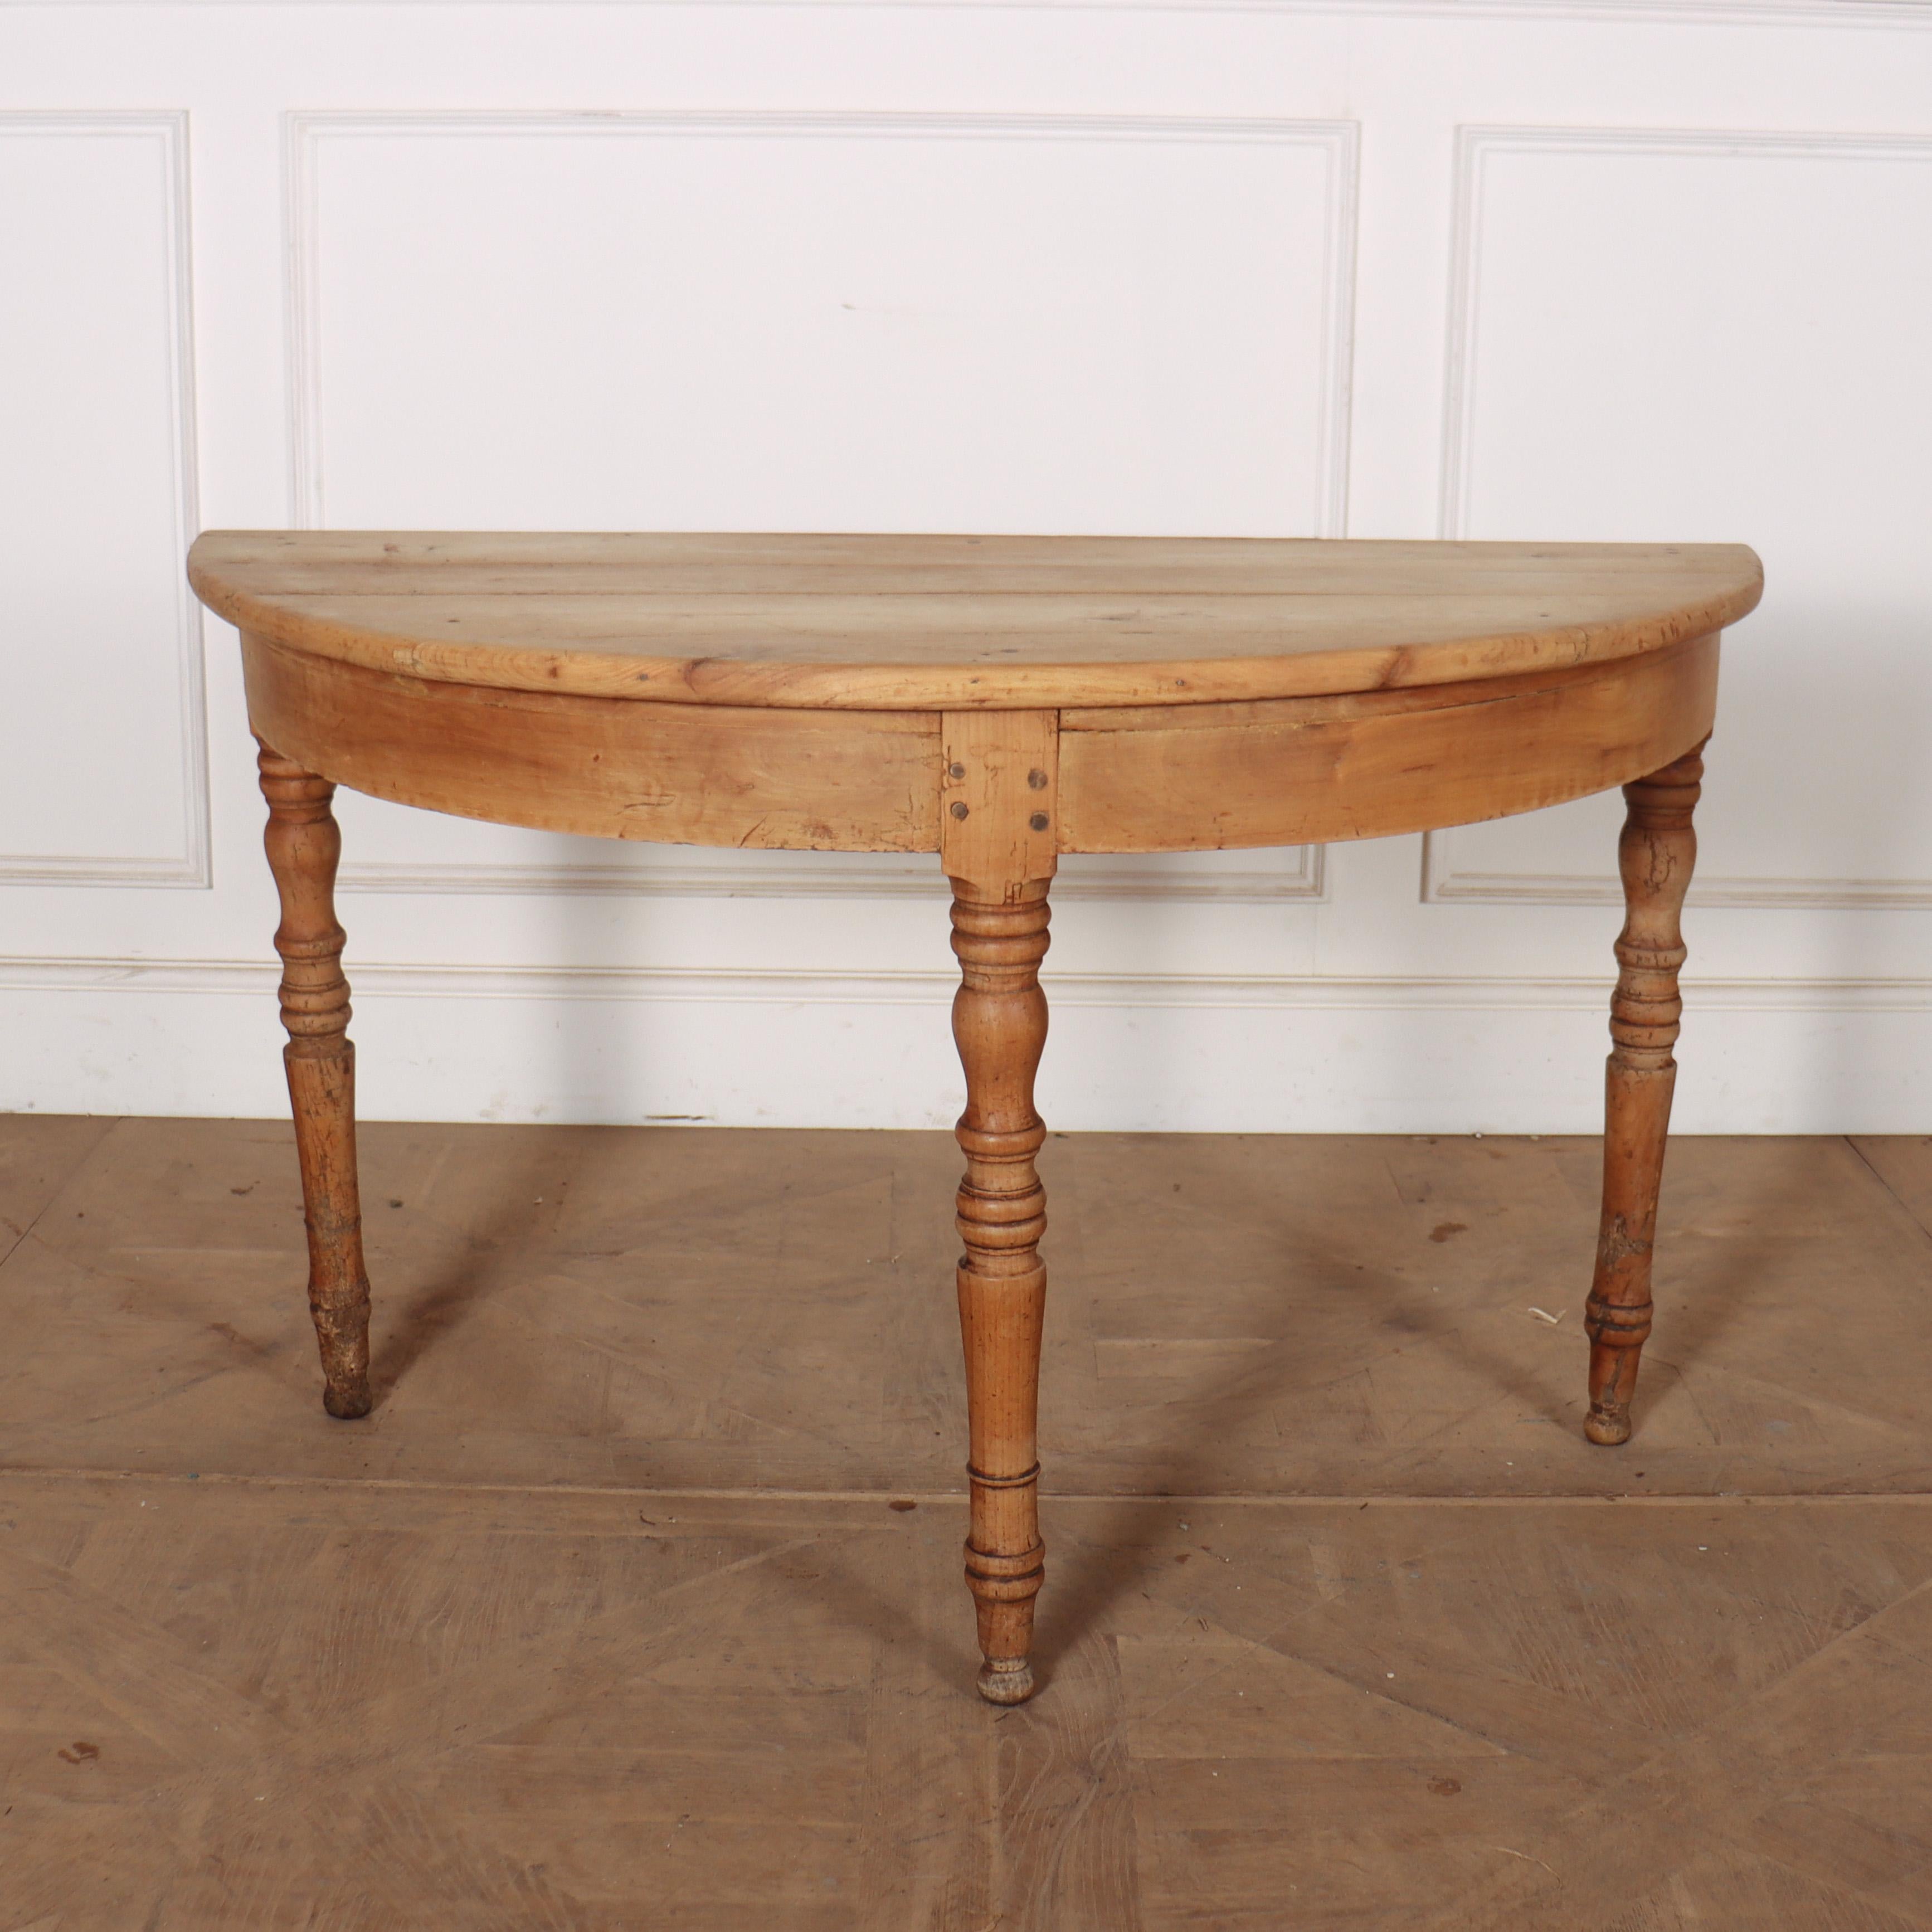 Pair of Fruitwood Demi Lune Console Tables In Good Condition For Sale In Leamington Spa, Warwickshire